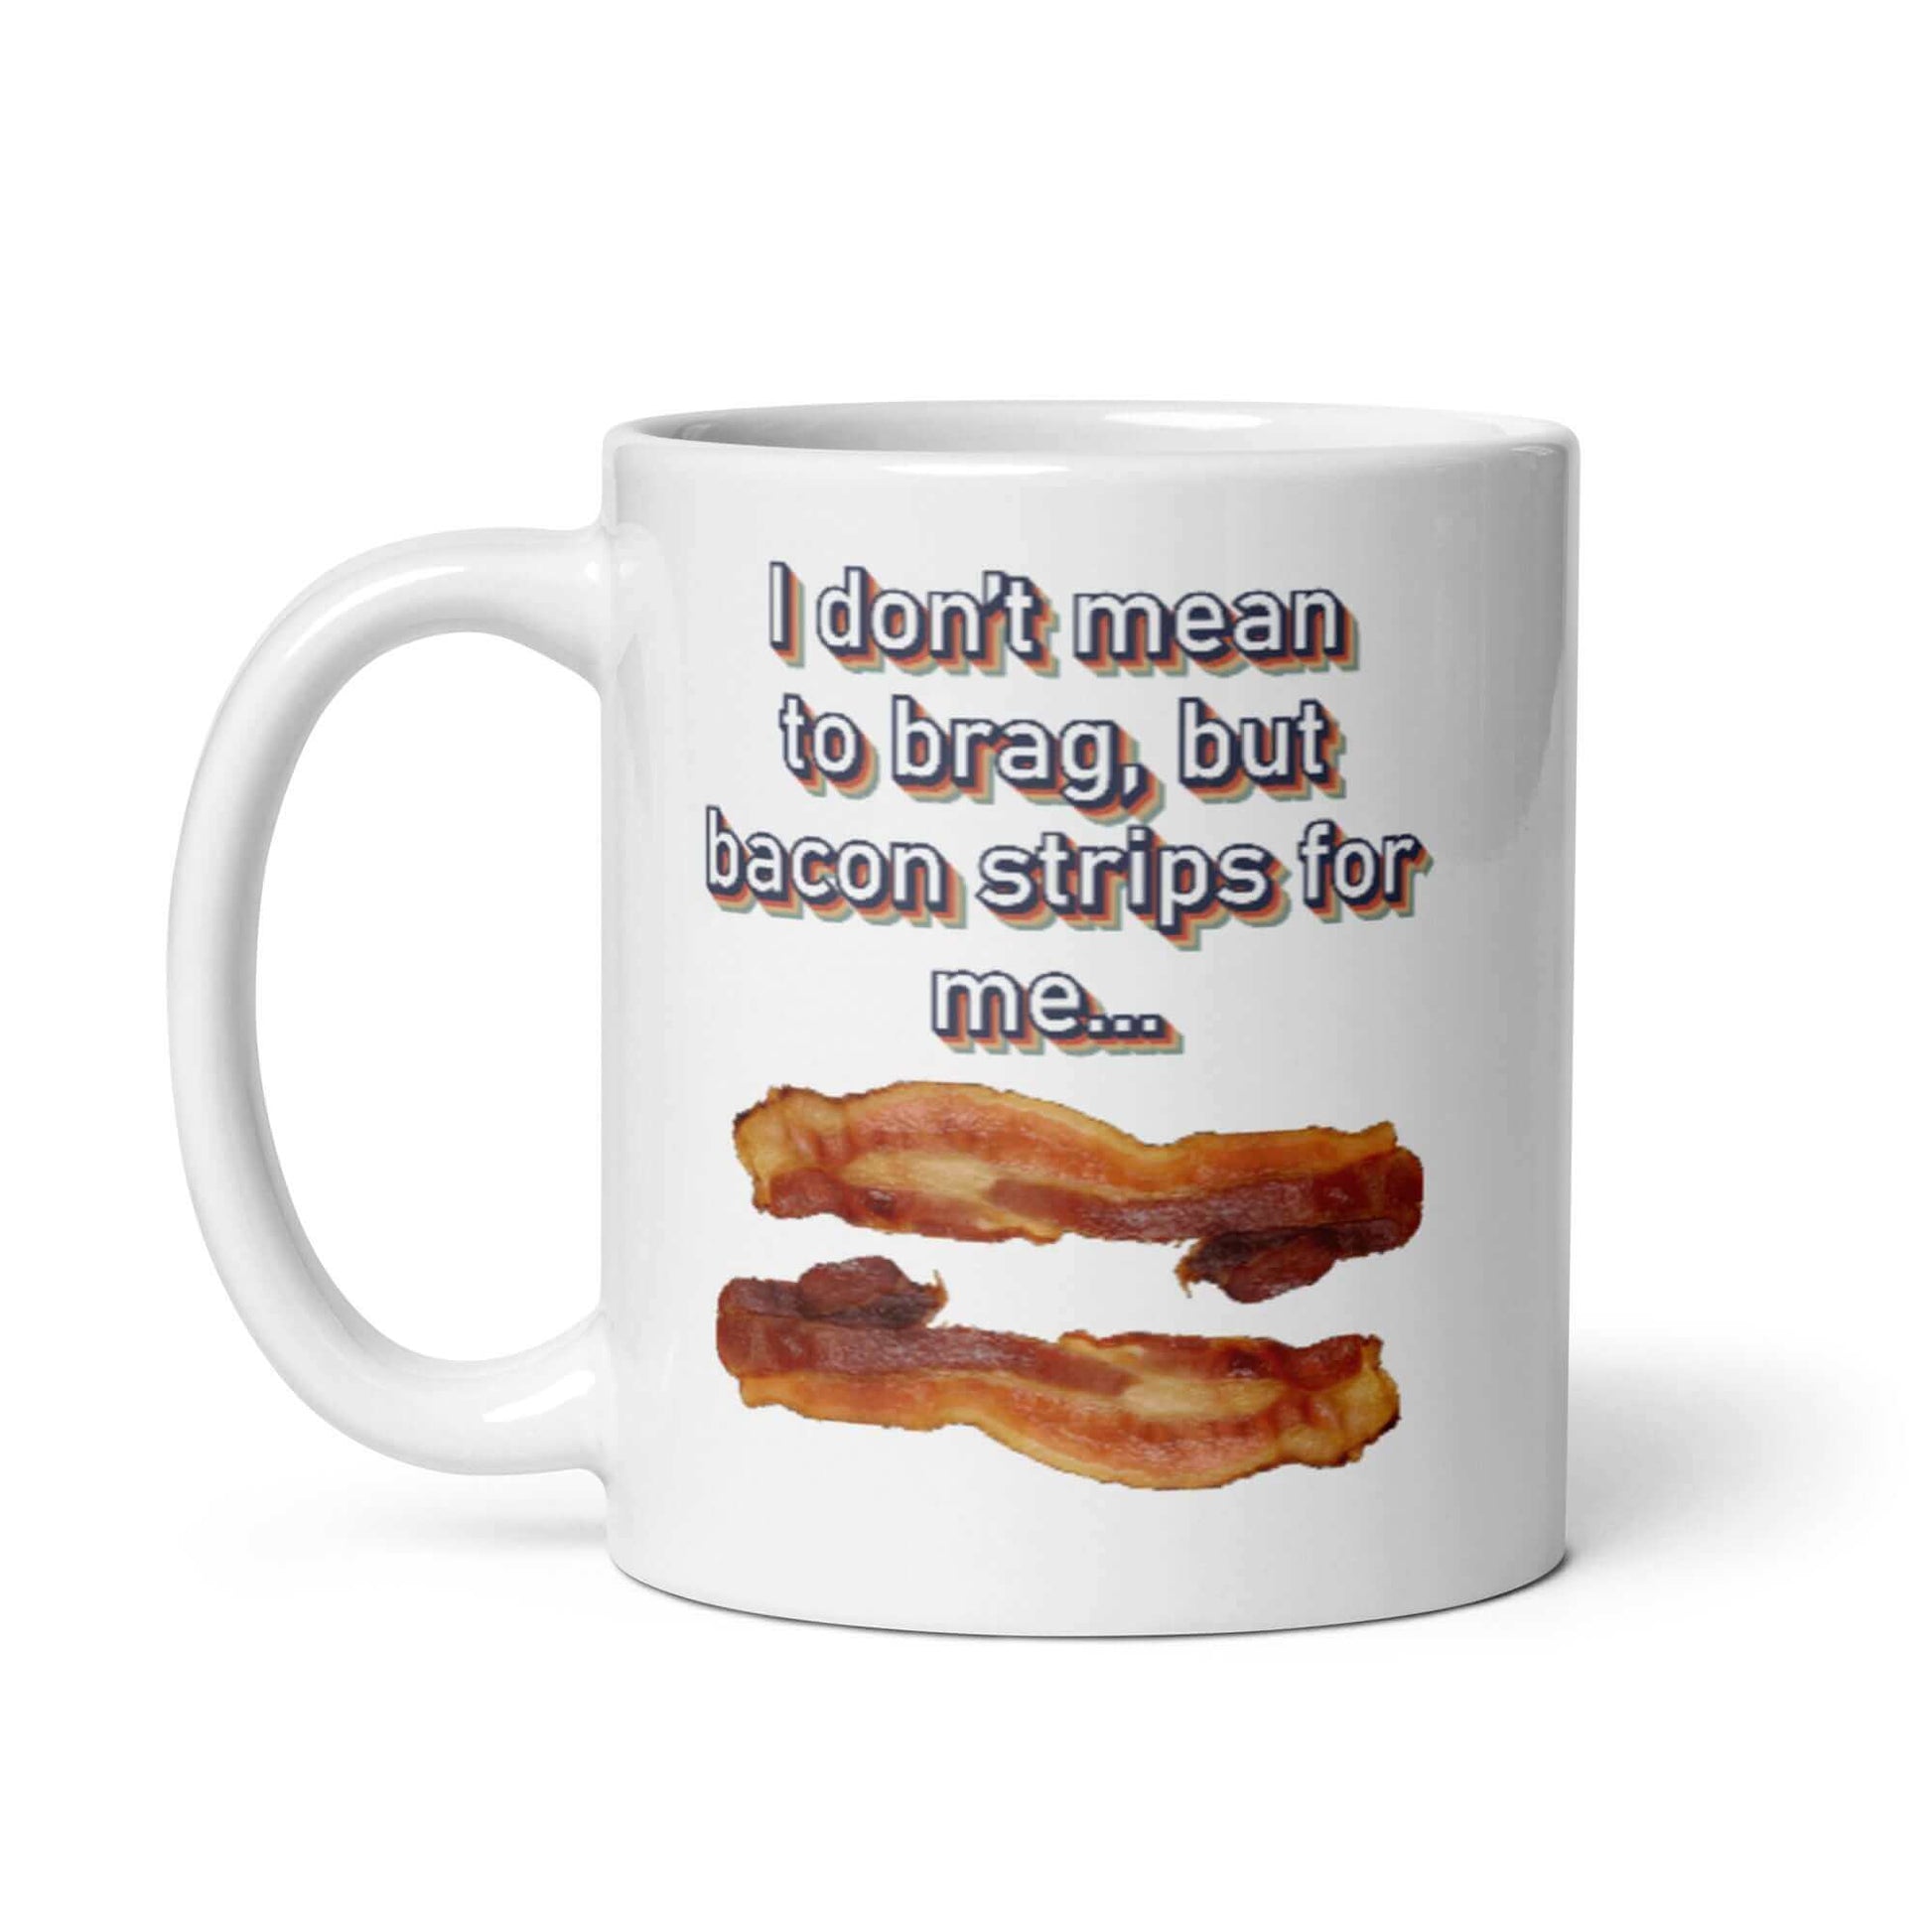 I don't mean to brag, but bacon strips for me - White glossy mug - Horrible Designs